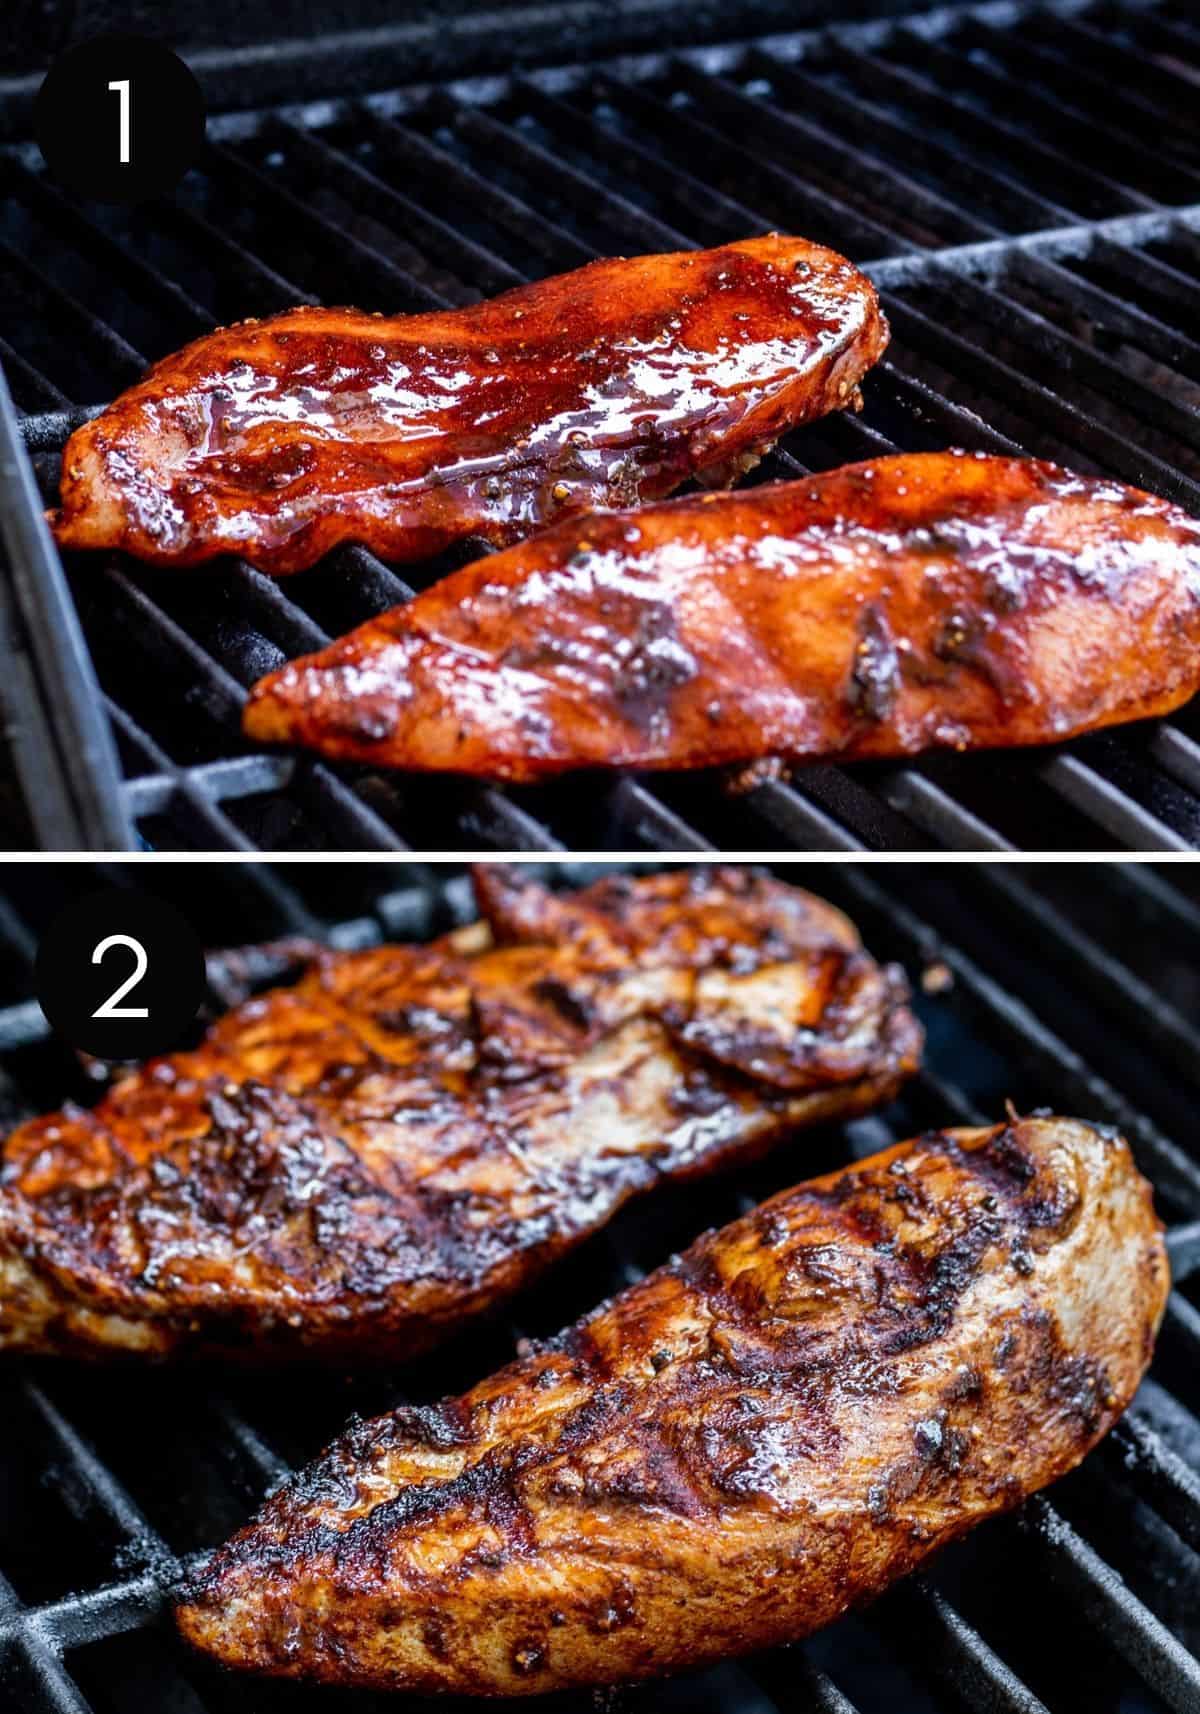 Two image collage of chicken being grilled outdoors.